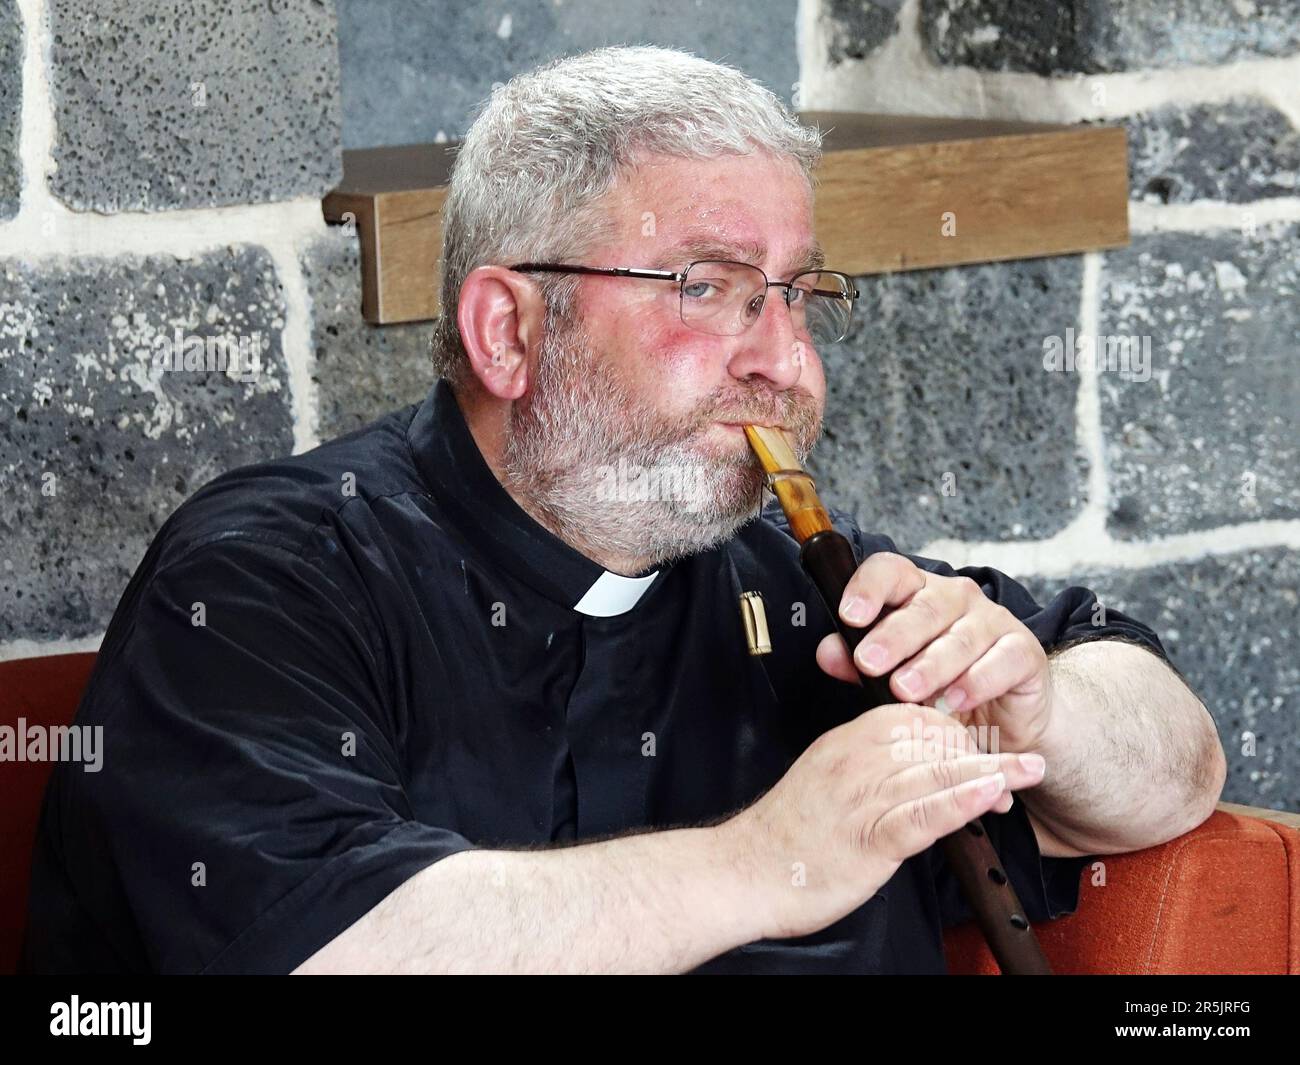 Senior Priest Abraham Firat plays a pipe during the ritual at Diyarbak?r Surp Hovsep Church. At the Surp Hovsep Armenian Catholic Church, which was heavily damaged in clashes between armed Kurdish PKK militants and Turkish security forces in the center of Diyarbakir in 2015 and repaired as a result of a 4-year restoration, the second ritual in the last 100 years after the first ritual in 2021. Very few Armenians who came from Istanbul and lived in Diyarbakir attended the ceremony. The ritual was led by Senior Priest Abraham Firat and Subordinate Deacon Jan Acemoglu, who were ordained from Ista Stock Photo